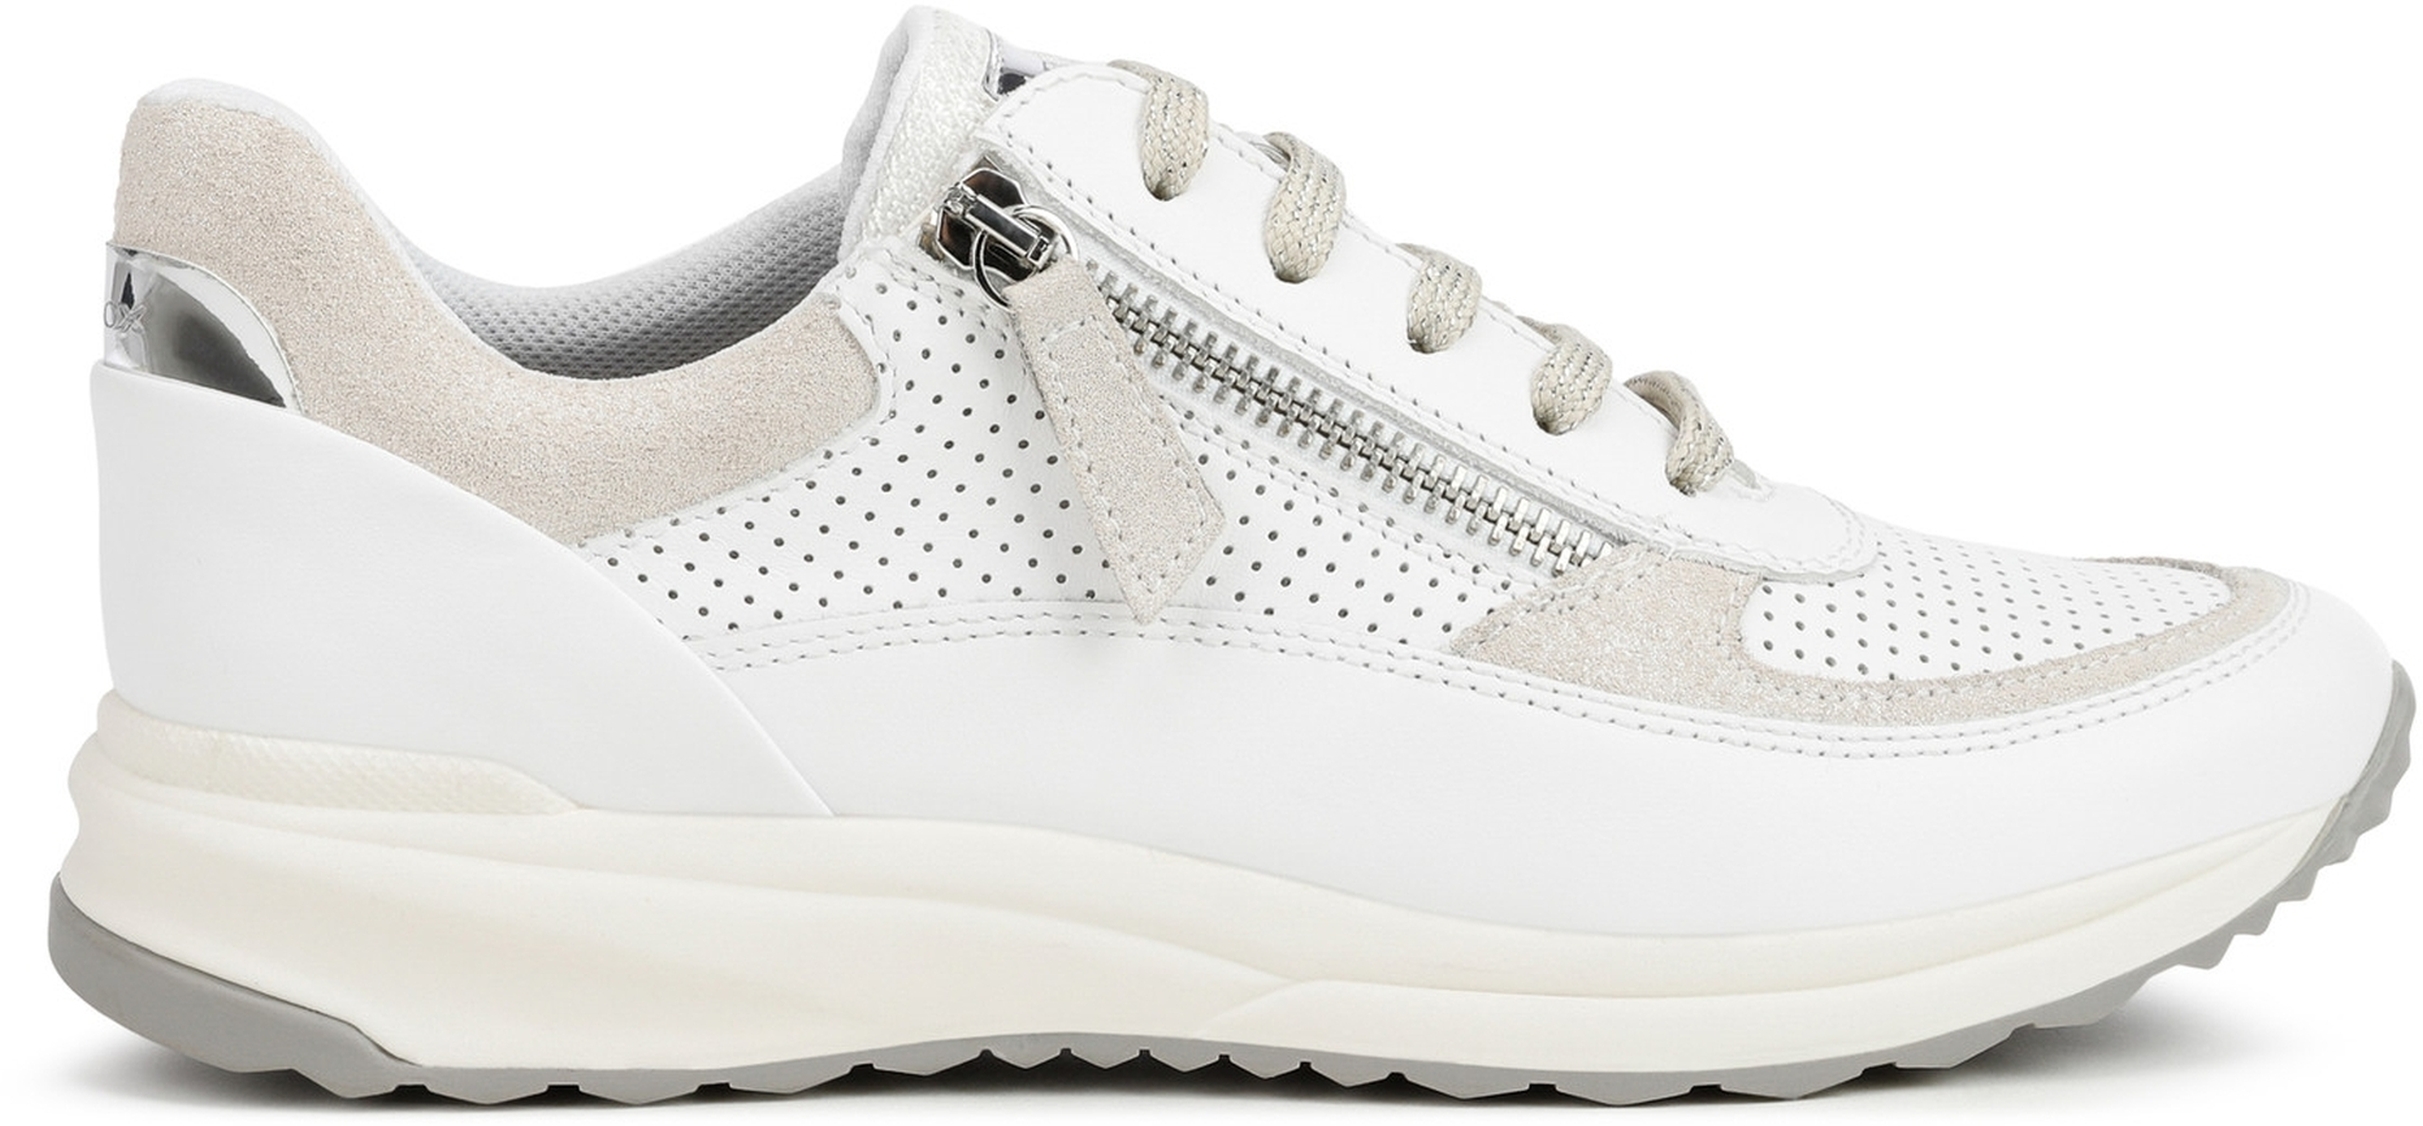 GEOX Airell A - White / Off White nappa leather